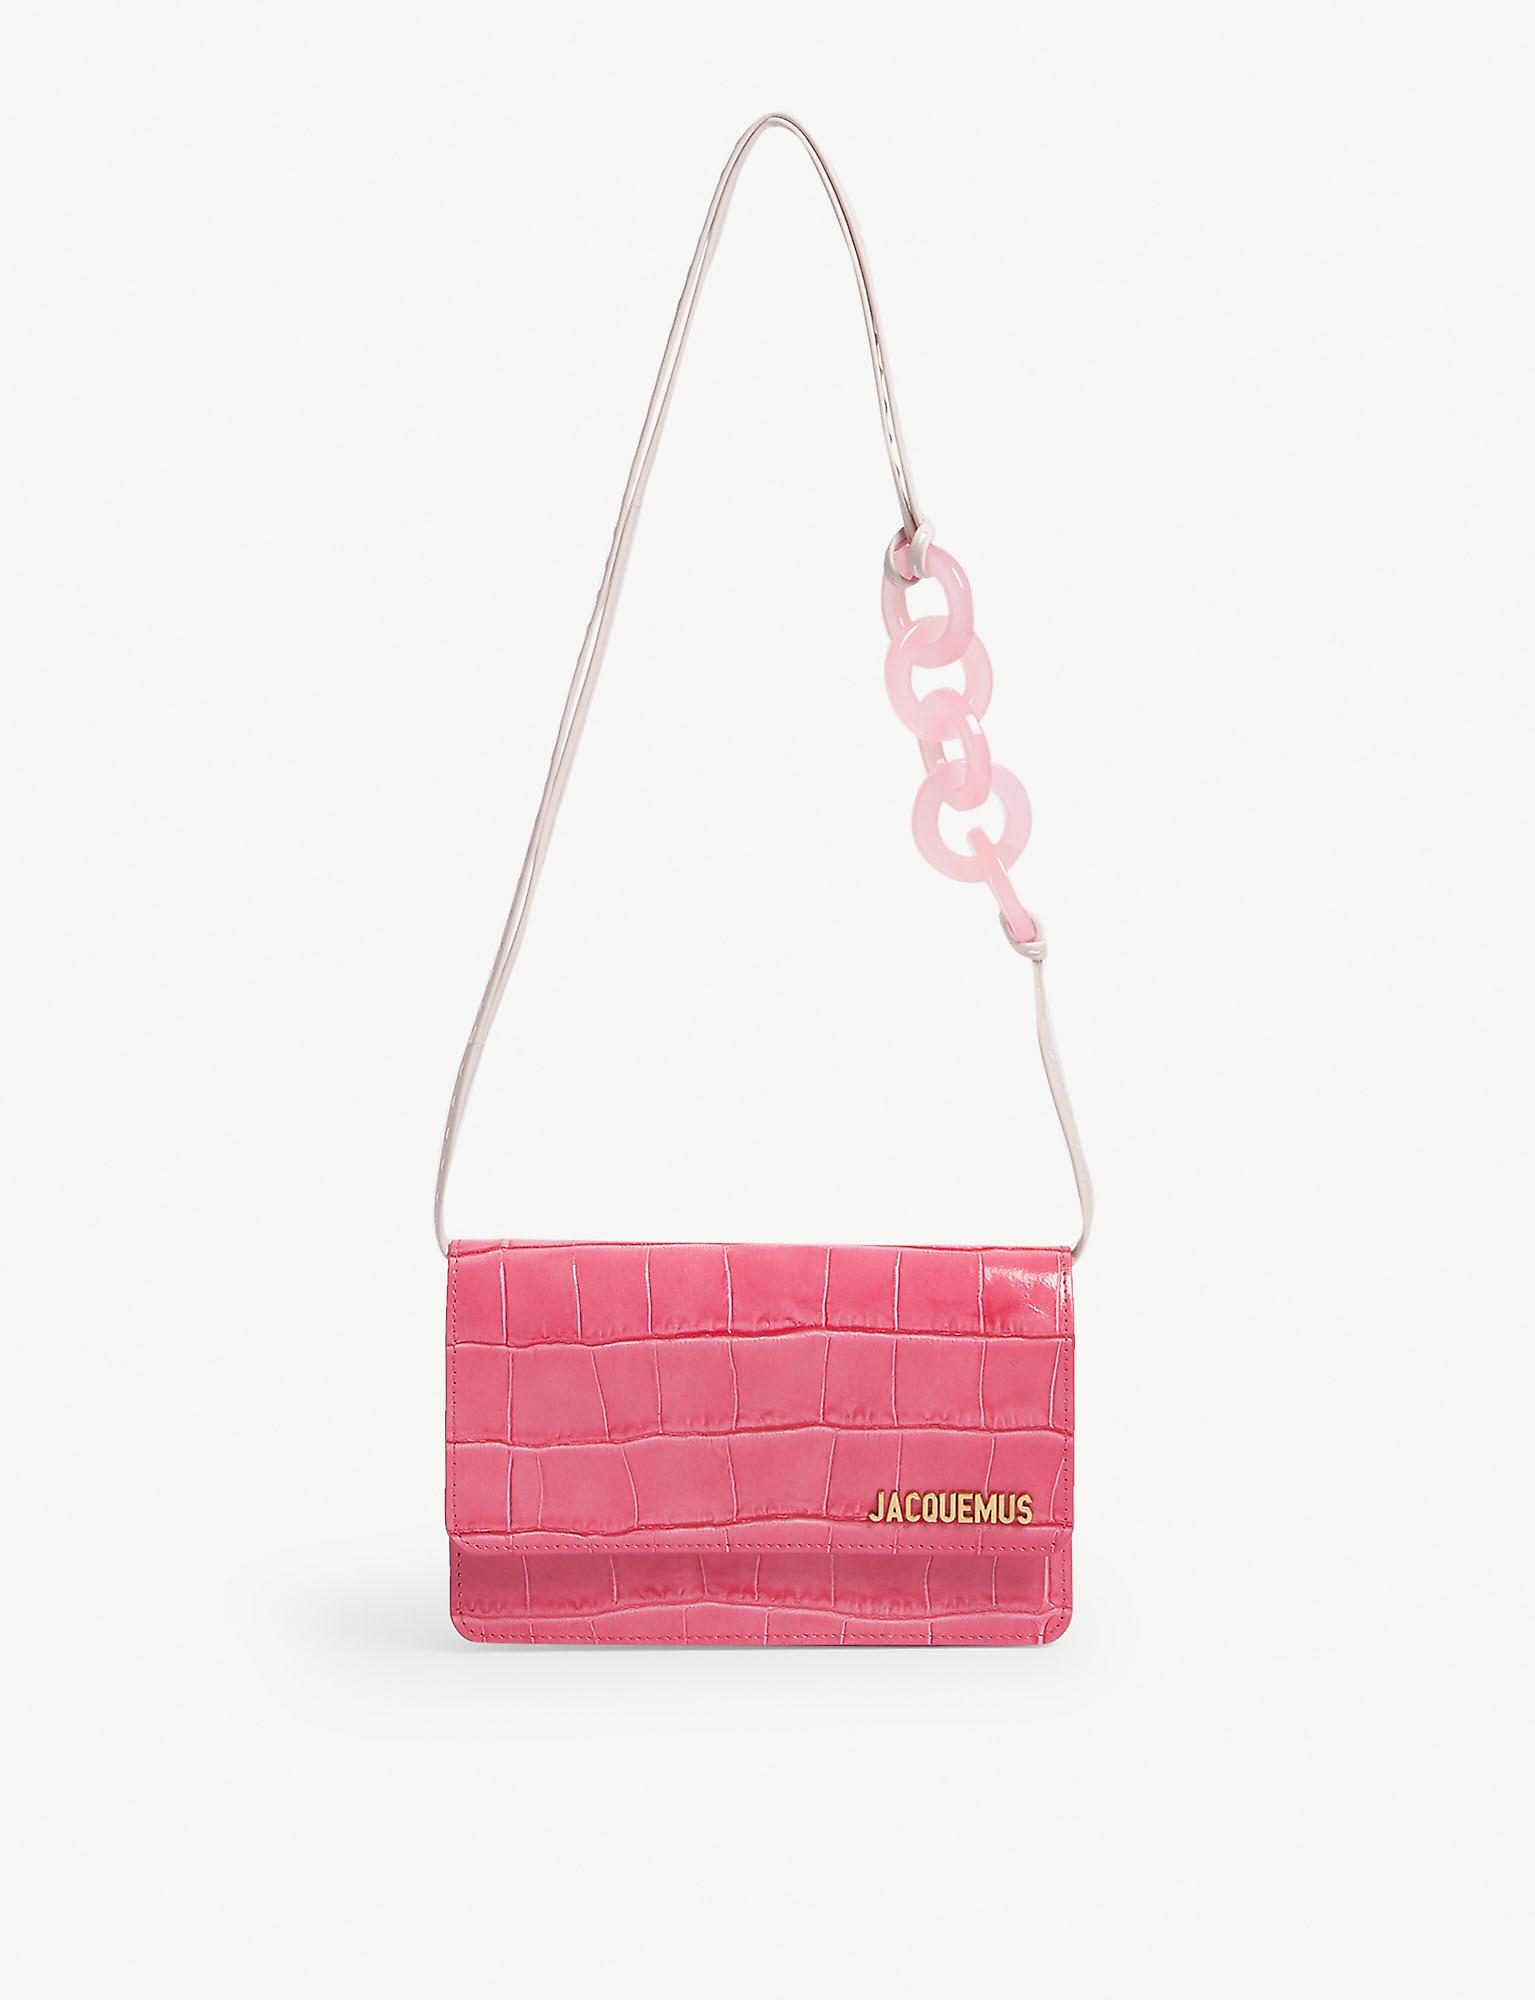 Jacquemus Leather Riviera Bag in Pink - Lyst